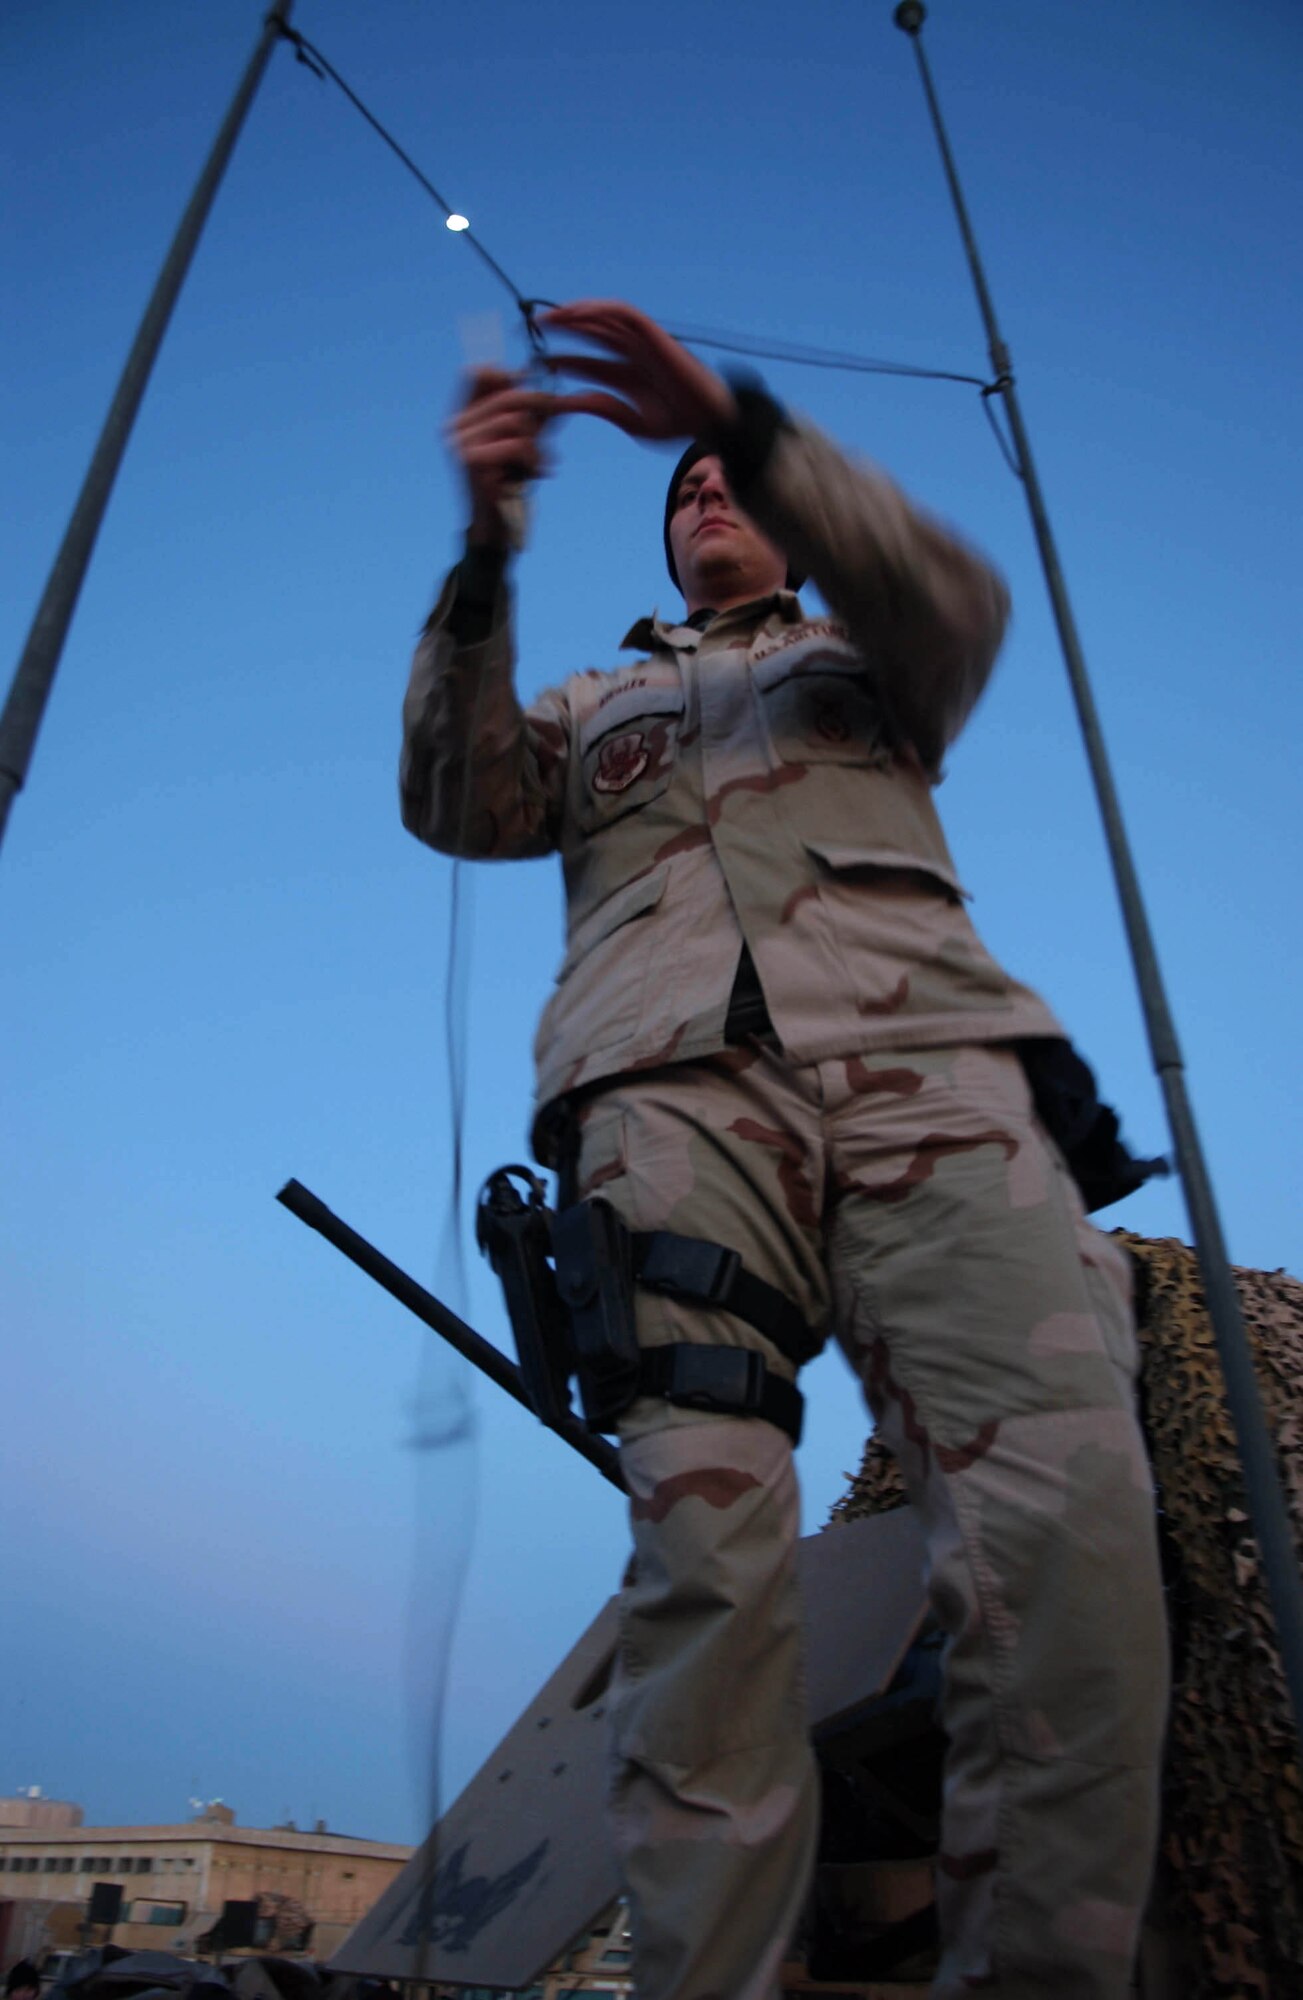 An Airman from Bravo Flight, Detachment 7, 732nd Expeditionary Security Forces Squadron adjusts the antenna of a high mobility, multi-wheeled vehicle prior to a mounted patrol in Baghdad, Iraq, Nov. 10, 2006. The security forces squadron's mission is to deploy into Baghdad's city streets to assist Iraqi police in achieving self-sufficiency and enabling orderly control of their battle space. (U.S. Air Force photo/Master Sgt. Steve Cline)